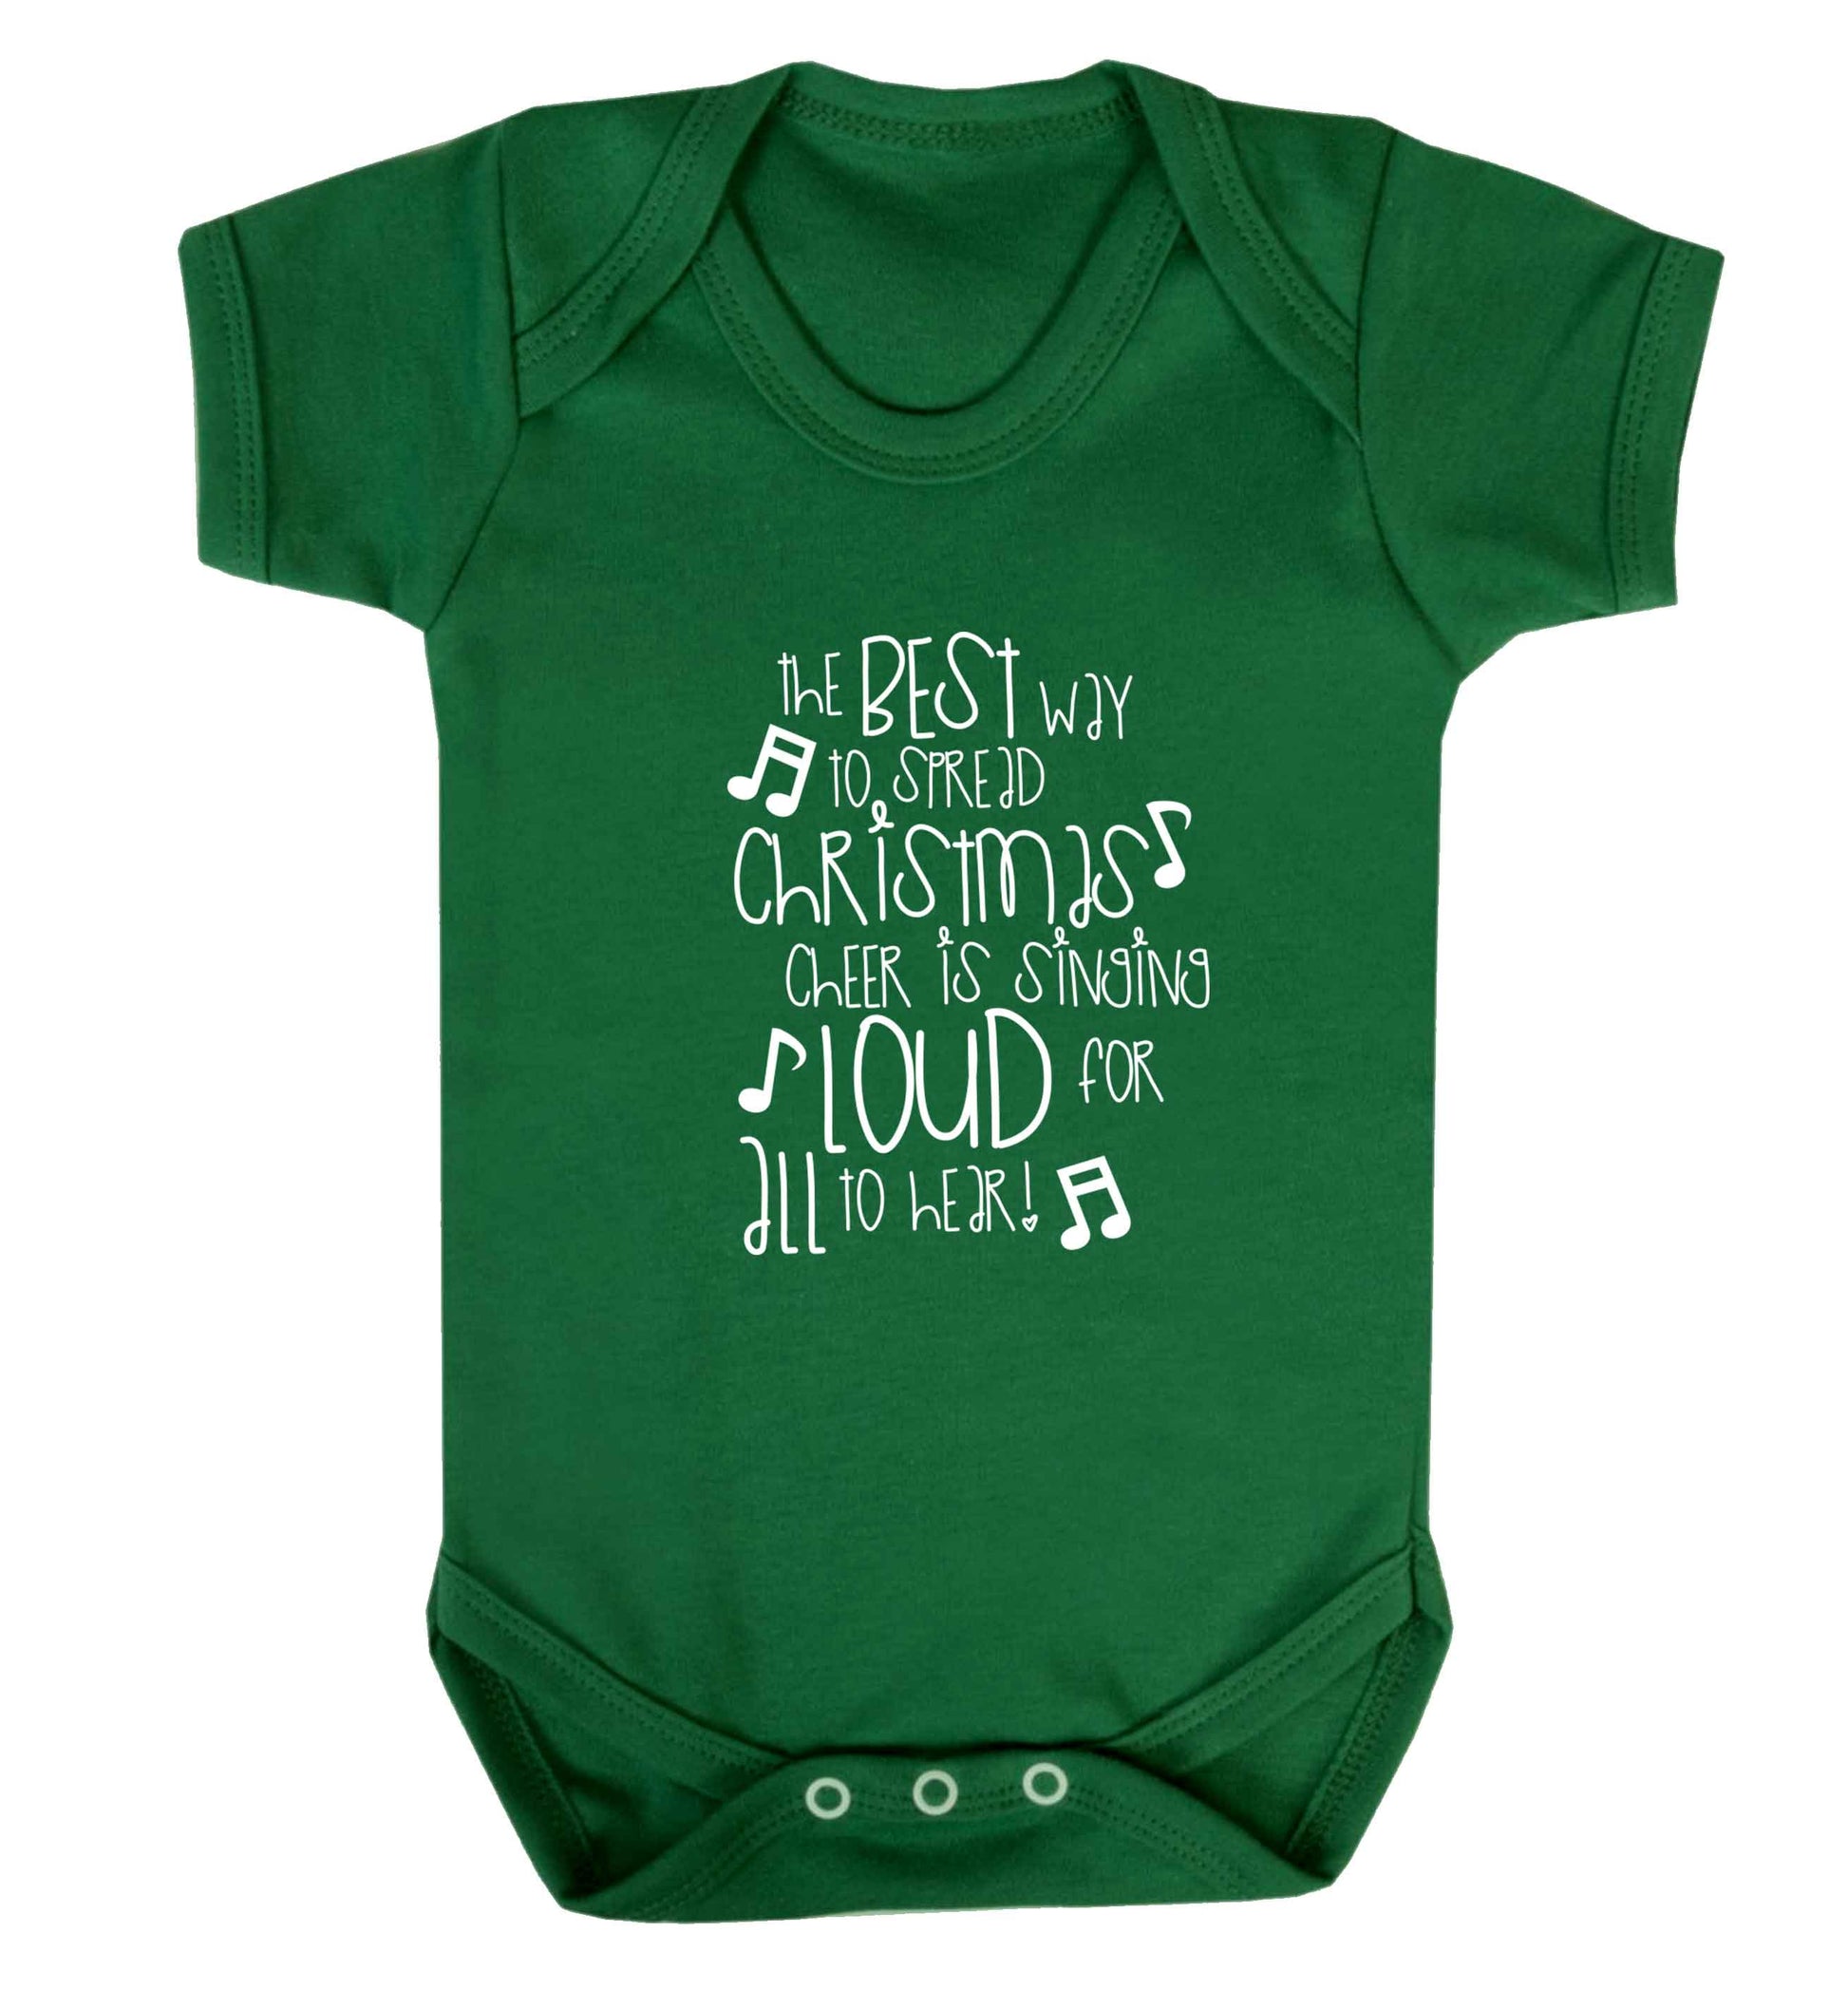 The best way to spread Christmas cheer is singing loud for all to hear baby vest green 18-24 months